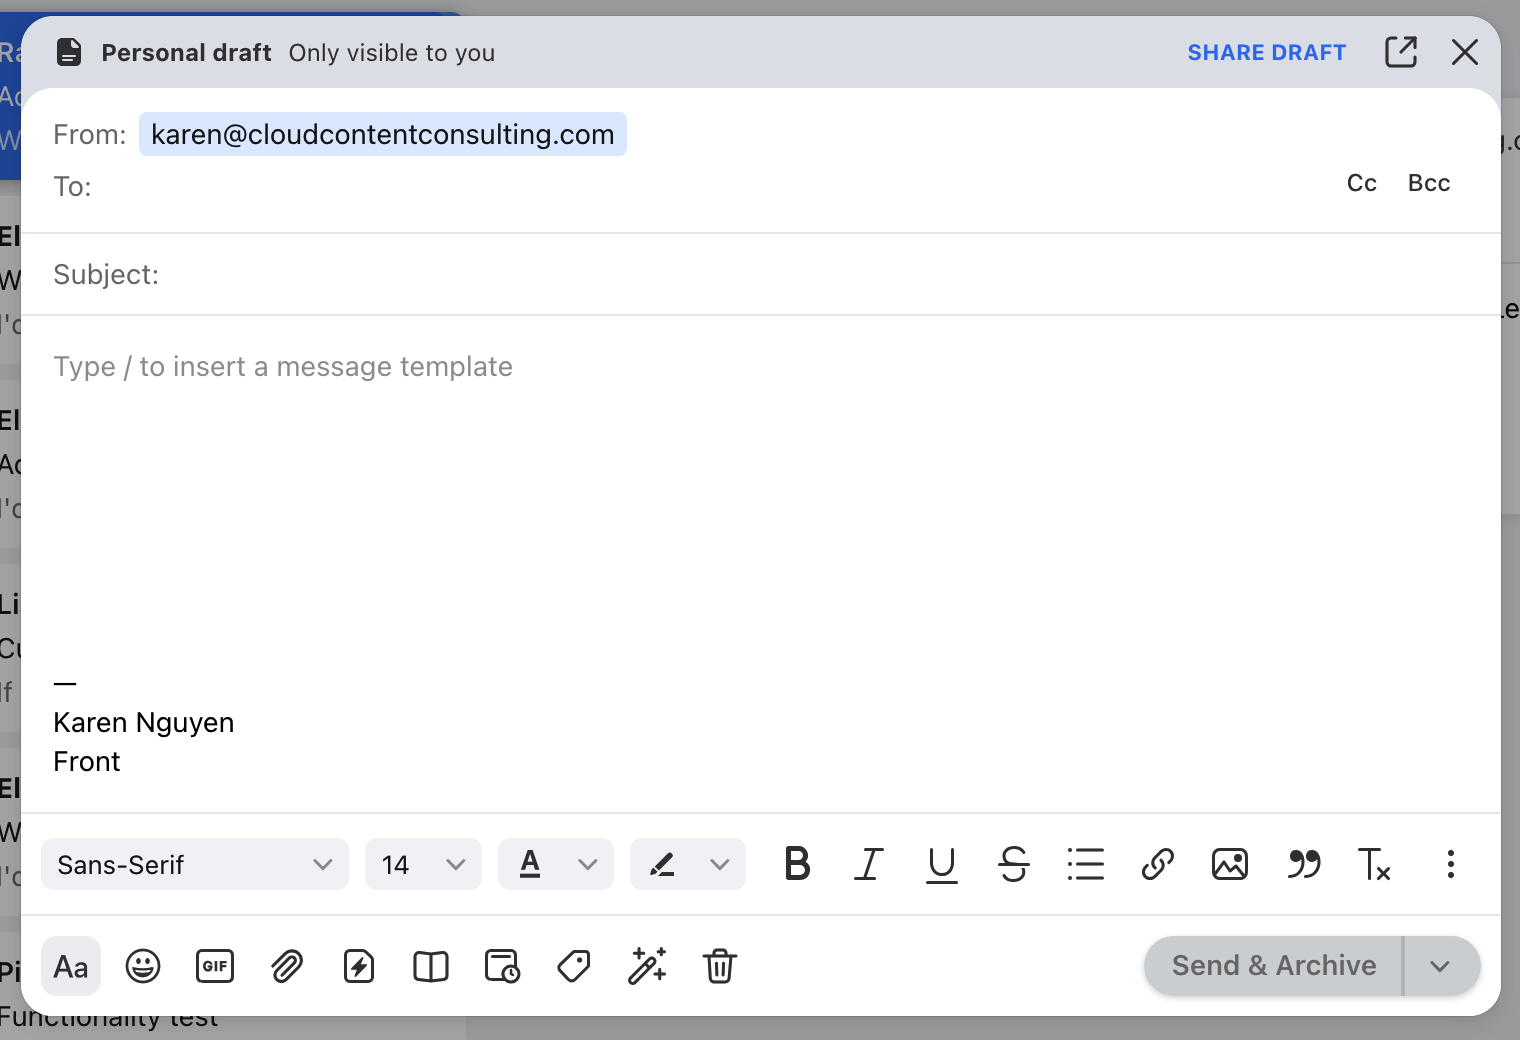 How to compose, send, and customize messages